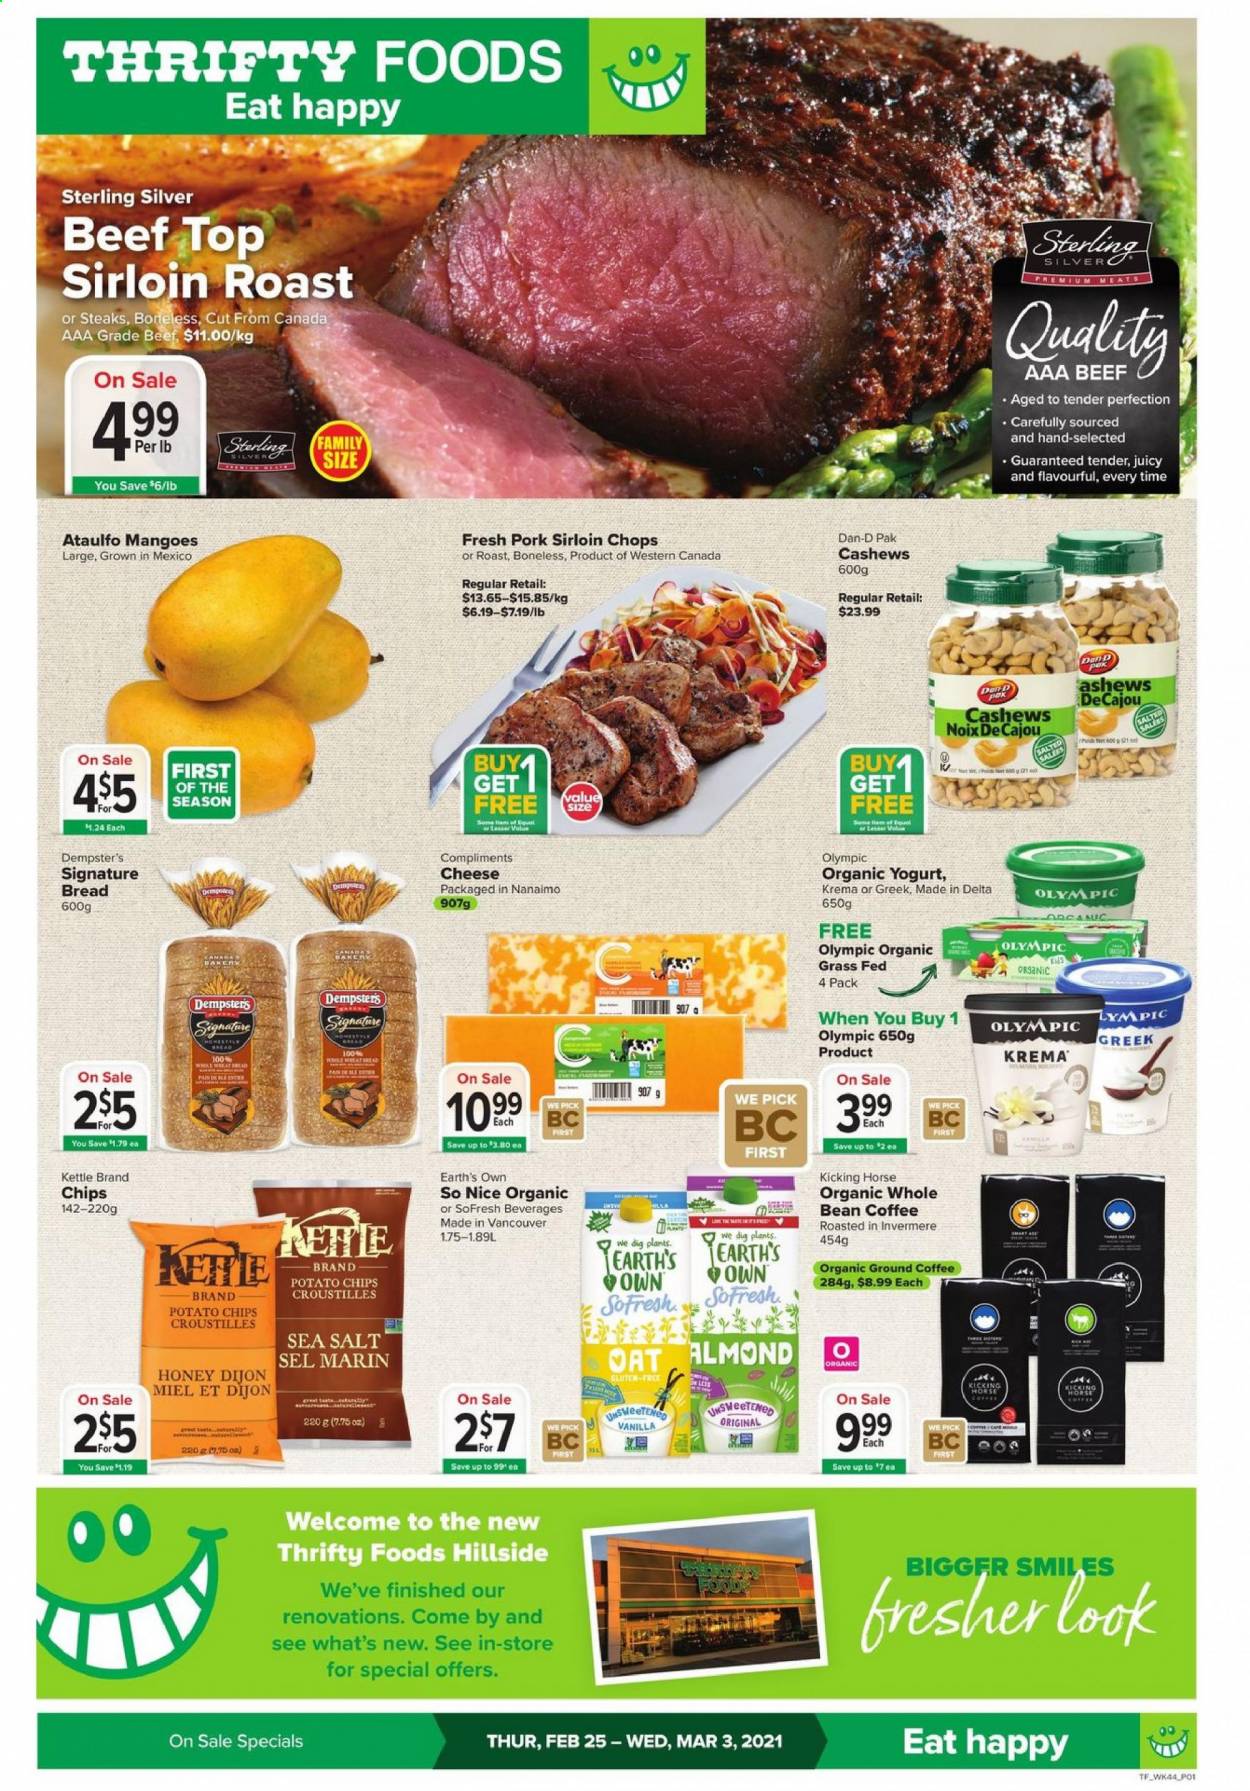 thumbnail - Thrifty Foods Flyer - February 25, 2021 - March 03, 2021 - Sales products - bread, cheese, yoghurt, organic yoghurt, oats, Dan-D Pak, honey, cashews, coffee, ground coffee, So Nice, pork loin, chips, steak. Page 1.